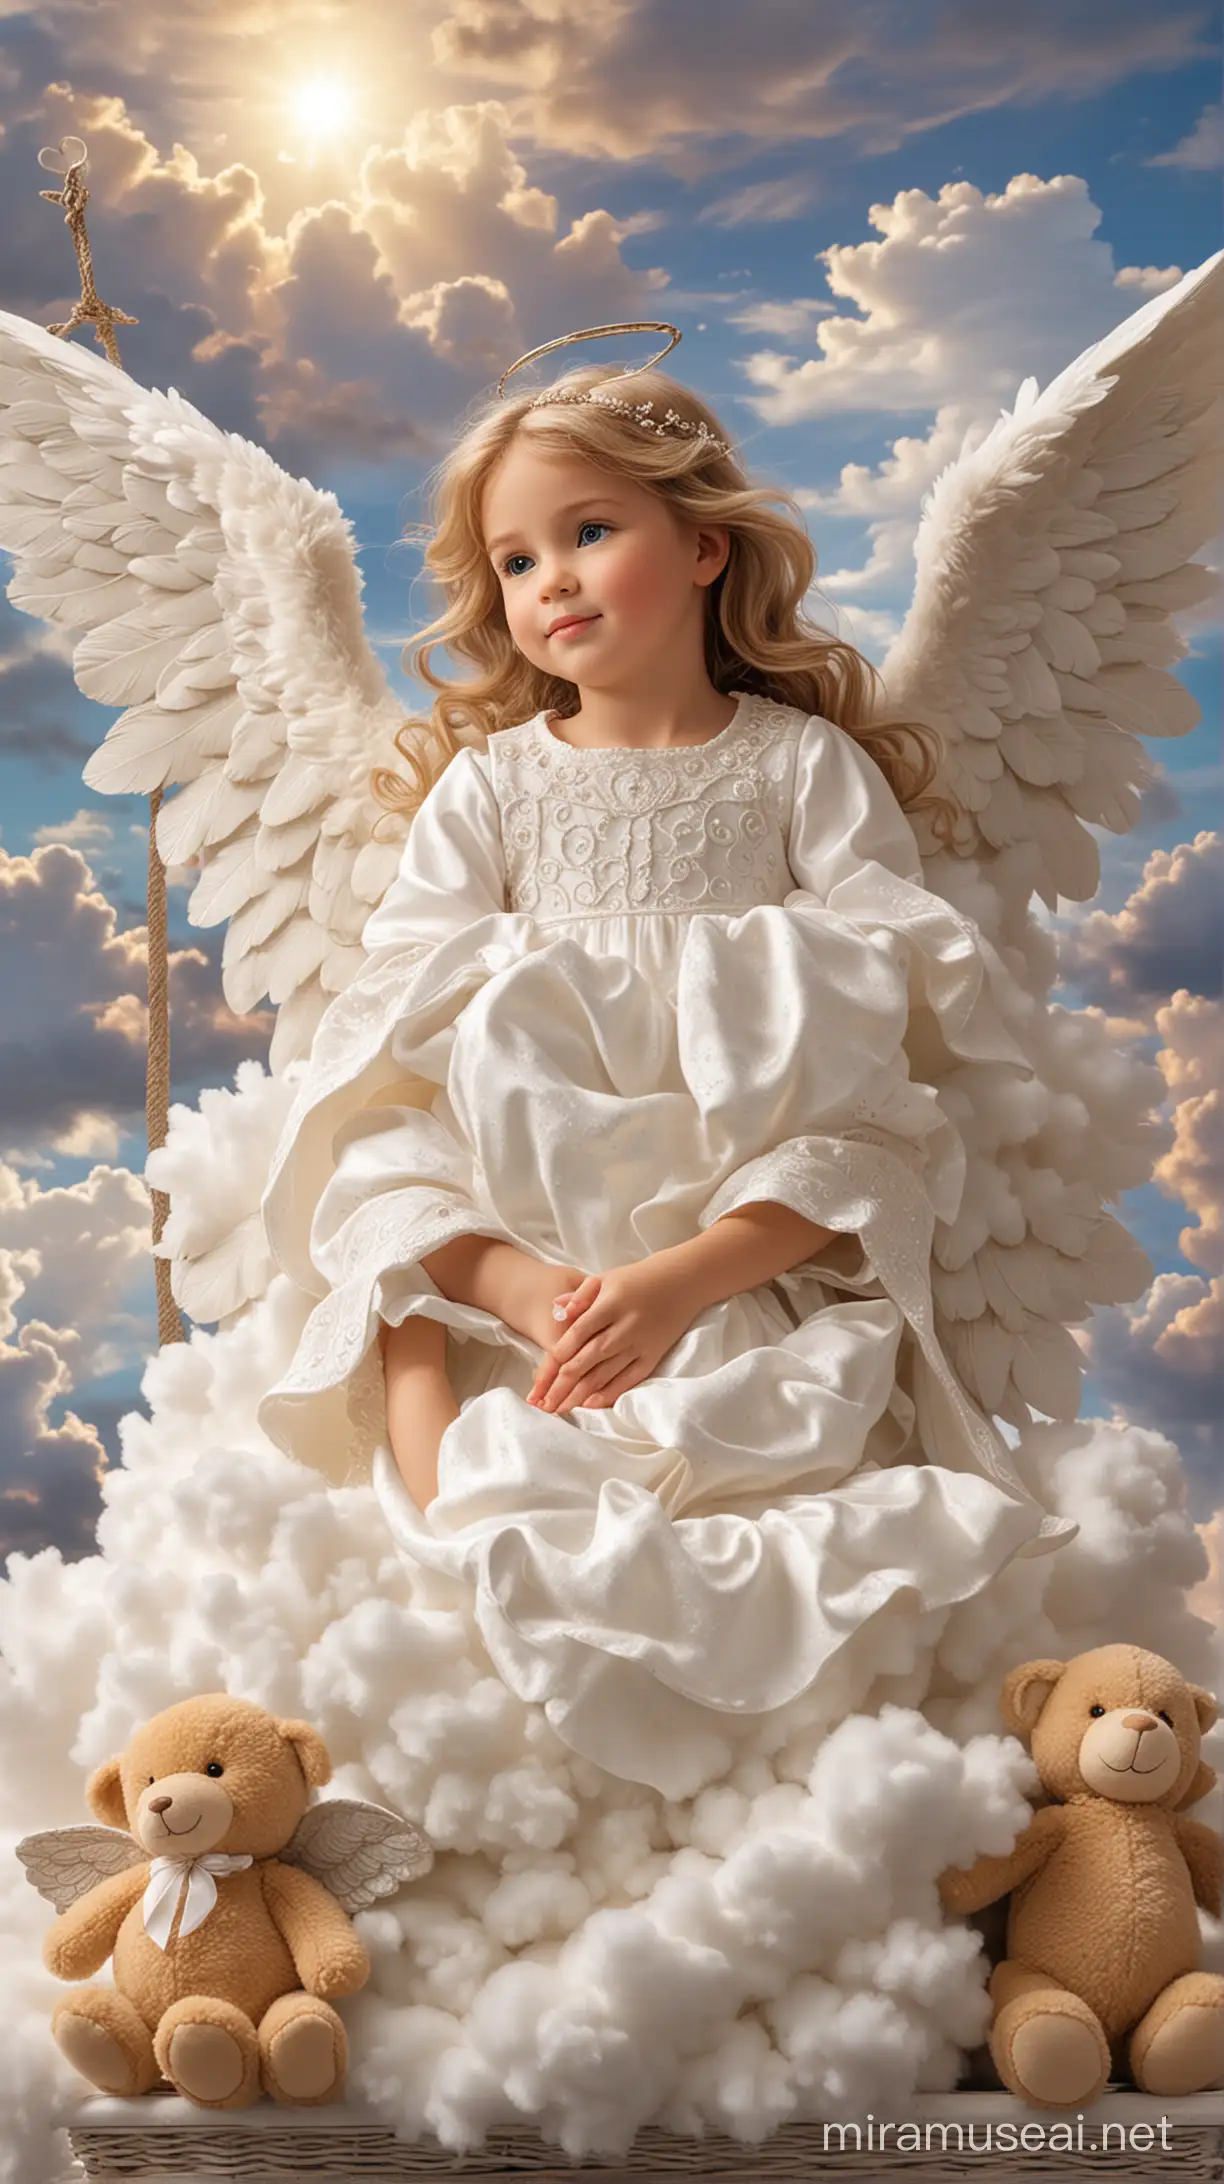 Luminous Angel Watching Over Sleeping Child on Bright Clouds